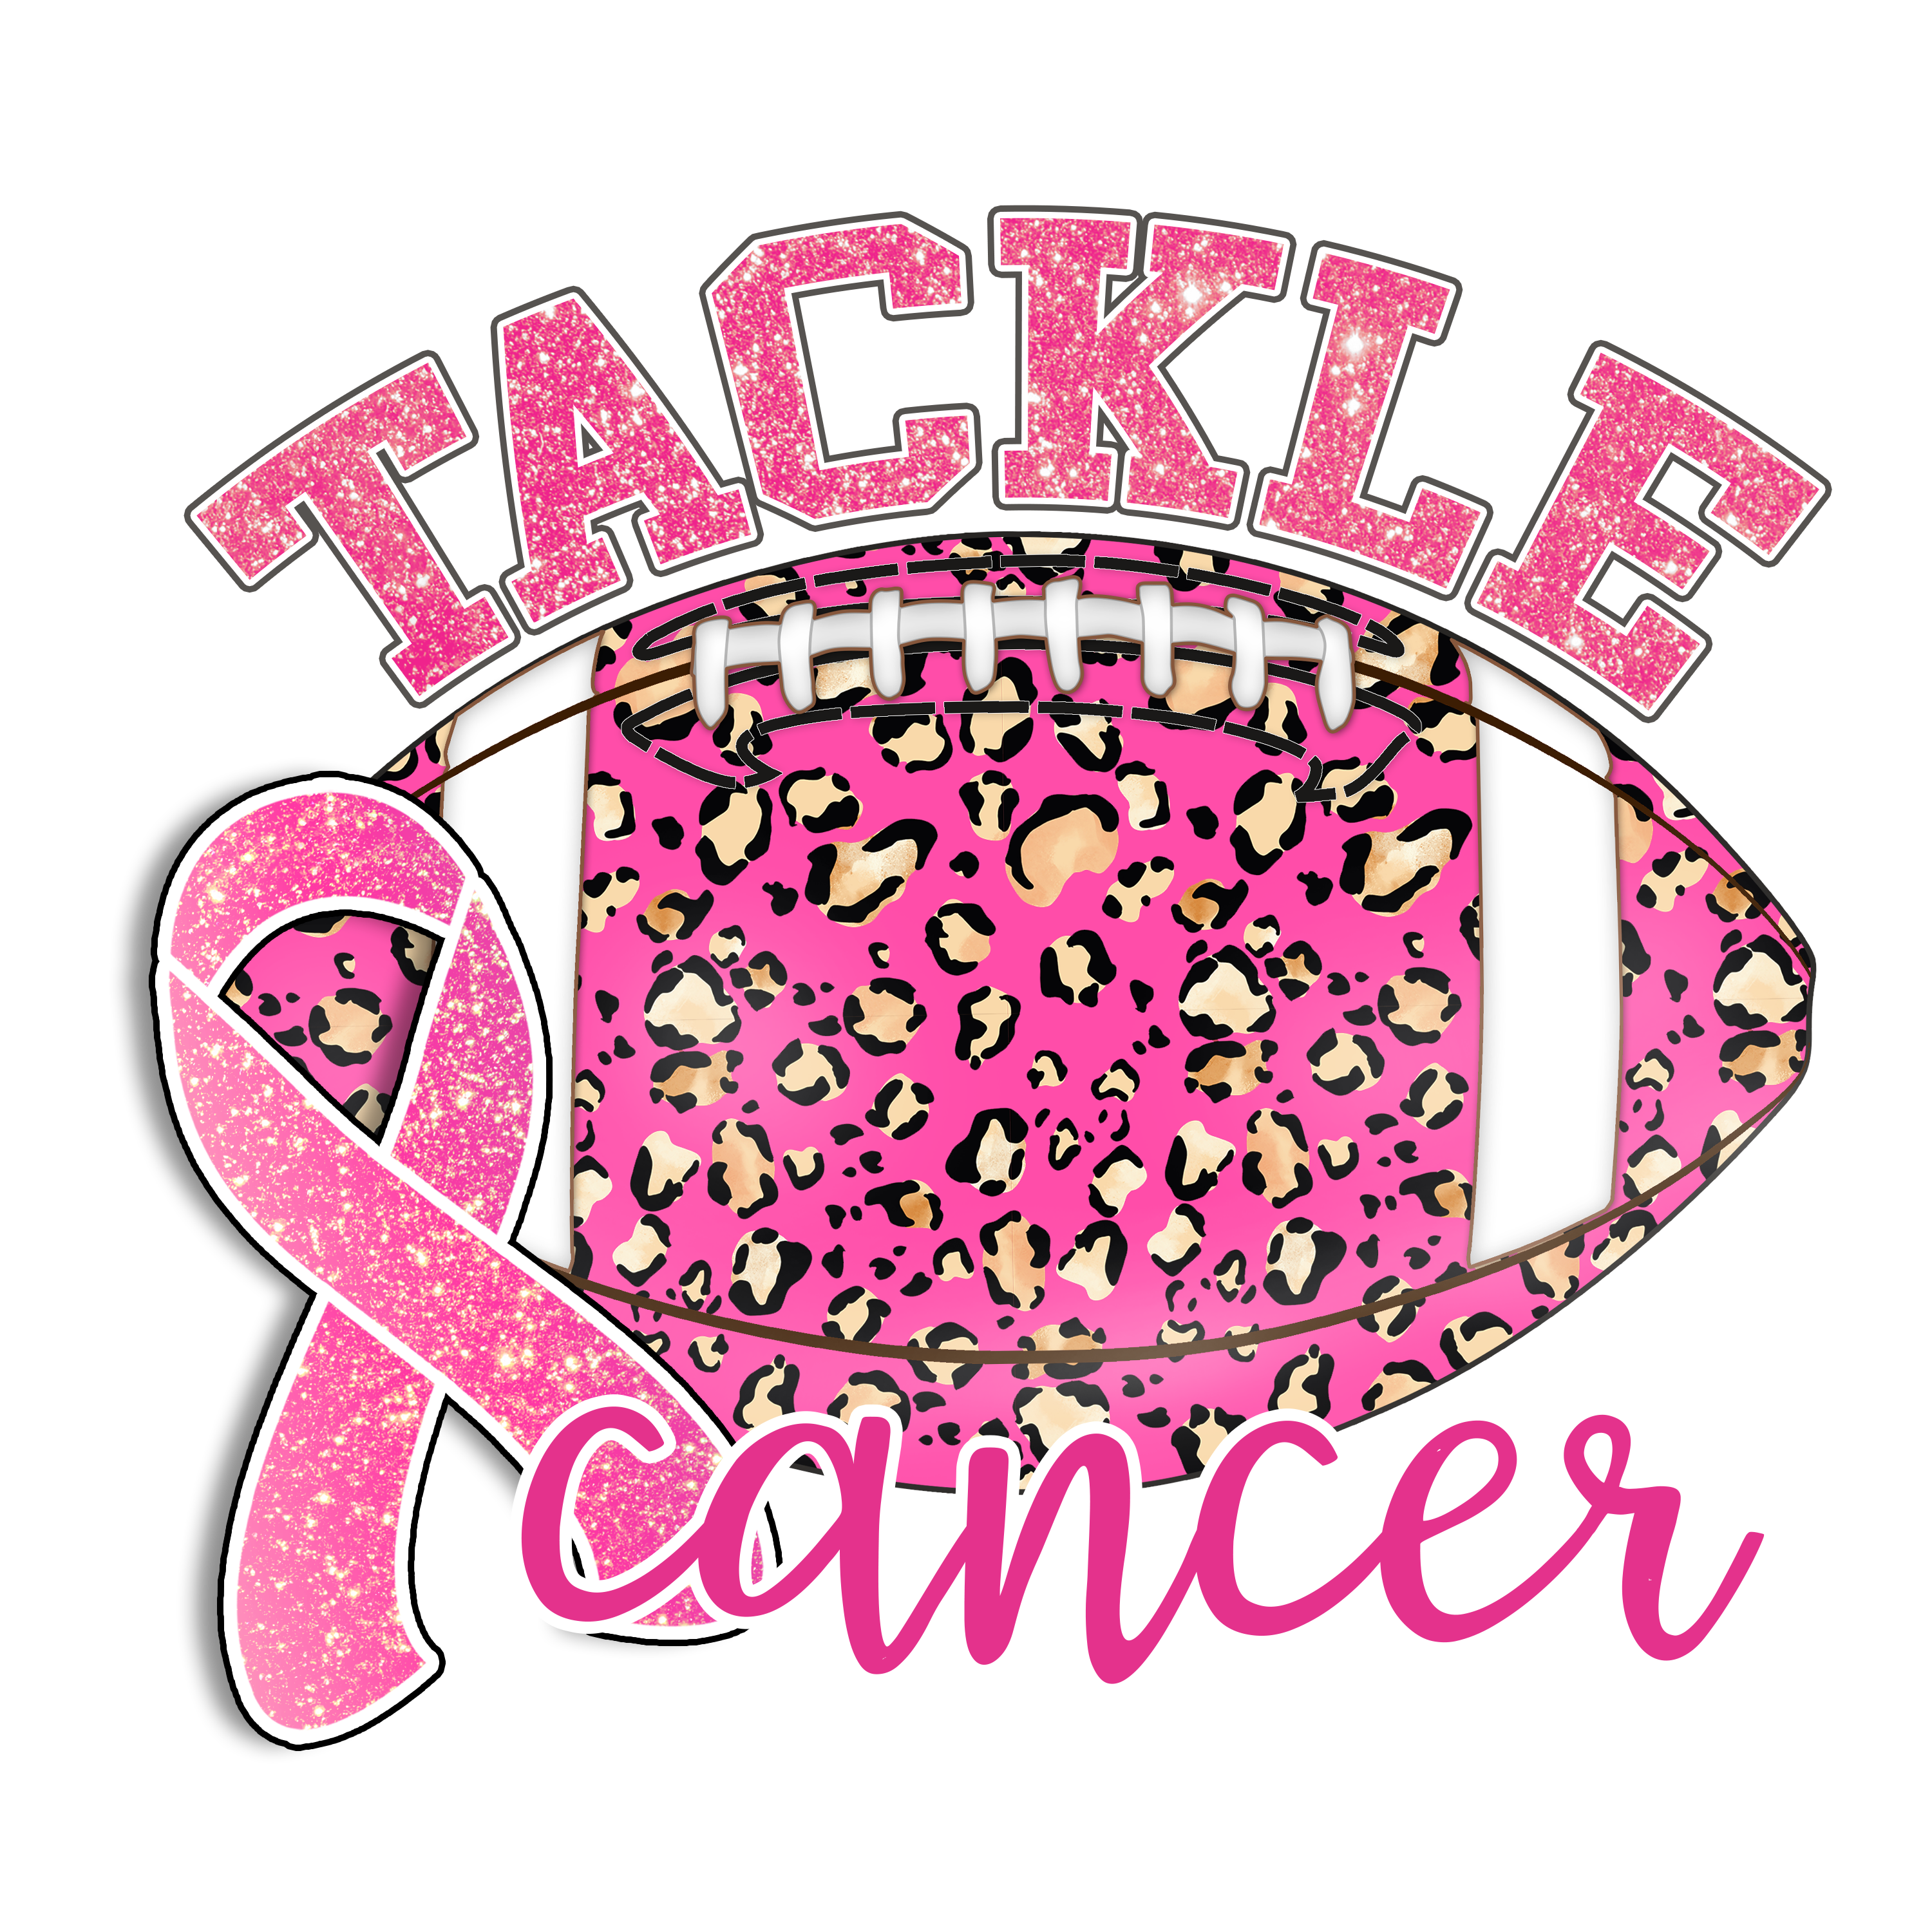 HTV Prints - Tackle Cancer - The Vinyl Haus